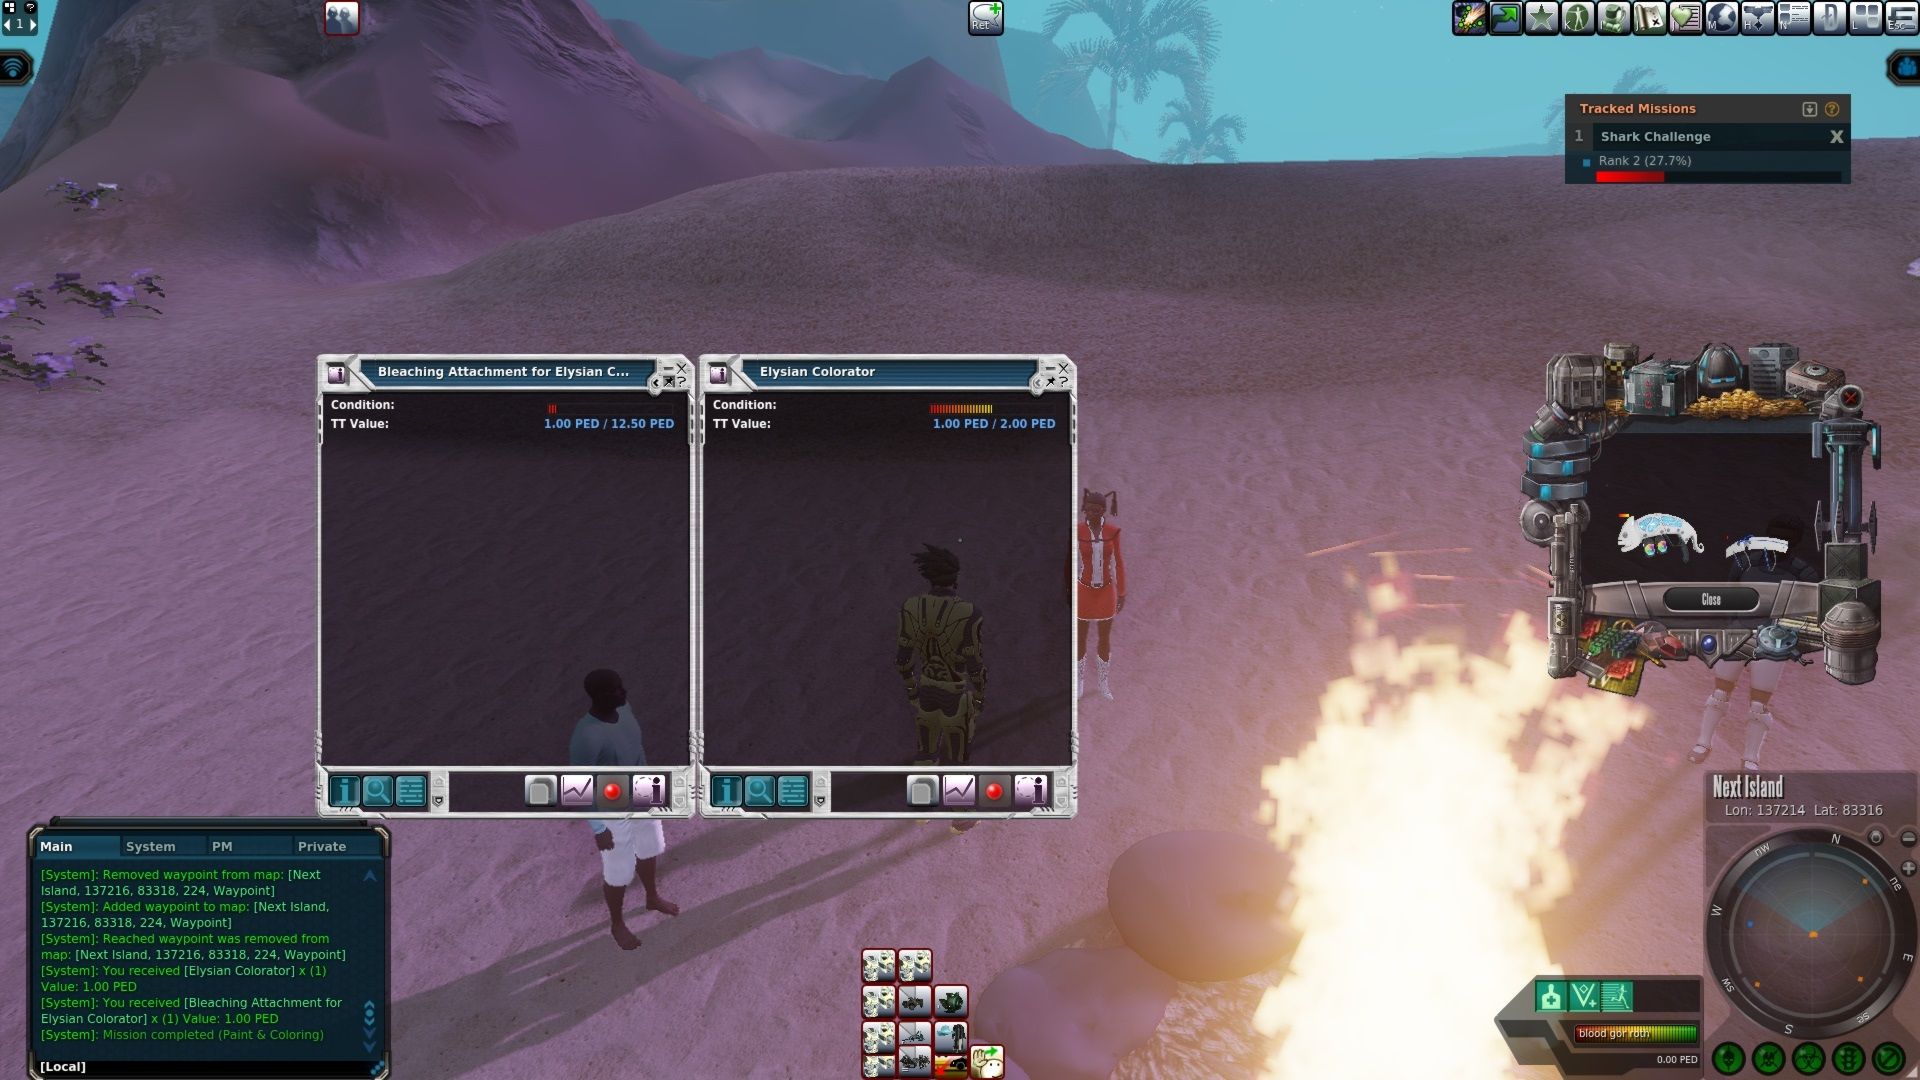 Rewards for gathering 20 wool for Paint and Coloring mission Next Island Entropia Universe.jpg